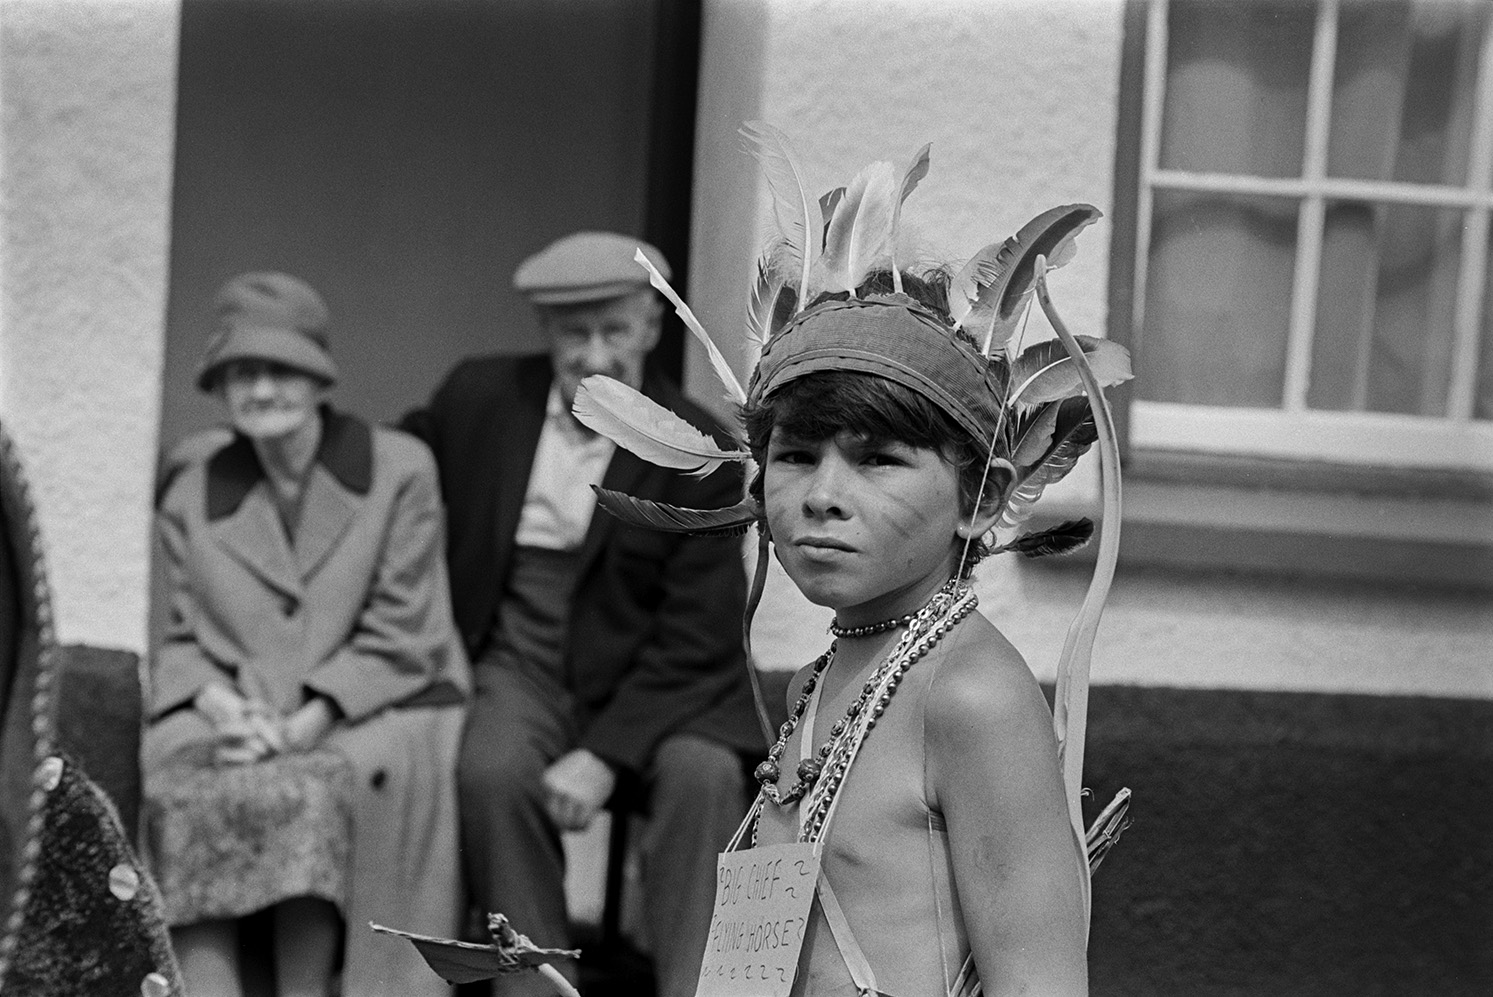 A man and woman sat in their doorway watching children in fancy dress parading through the street at Chulmleigh Fair. One child is dressed as an Indian Chief.